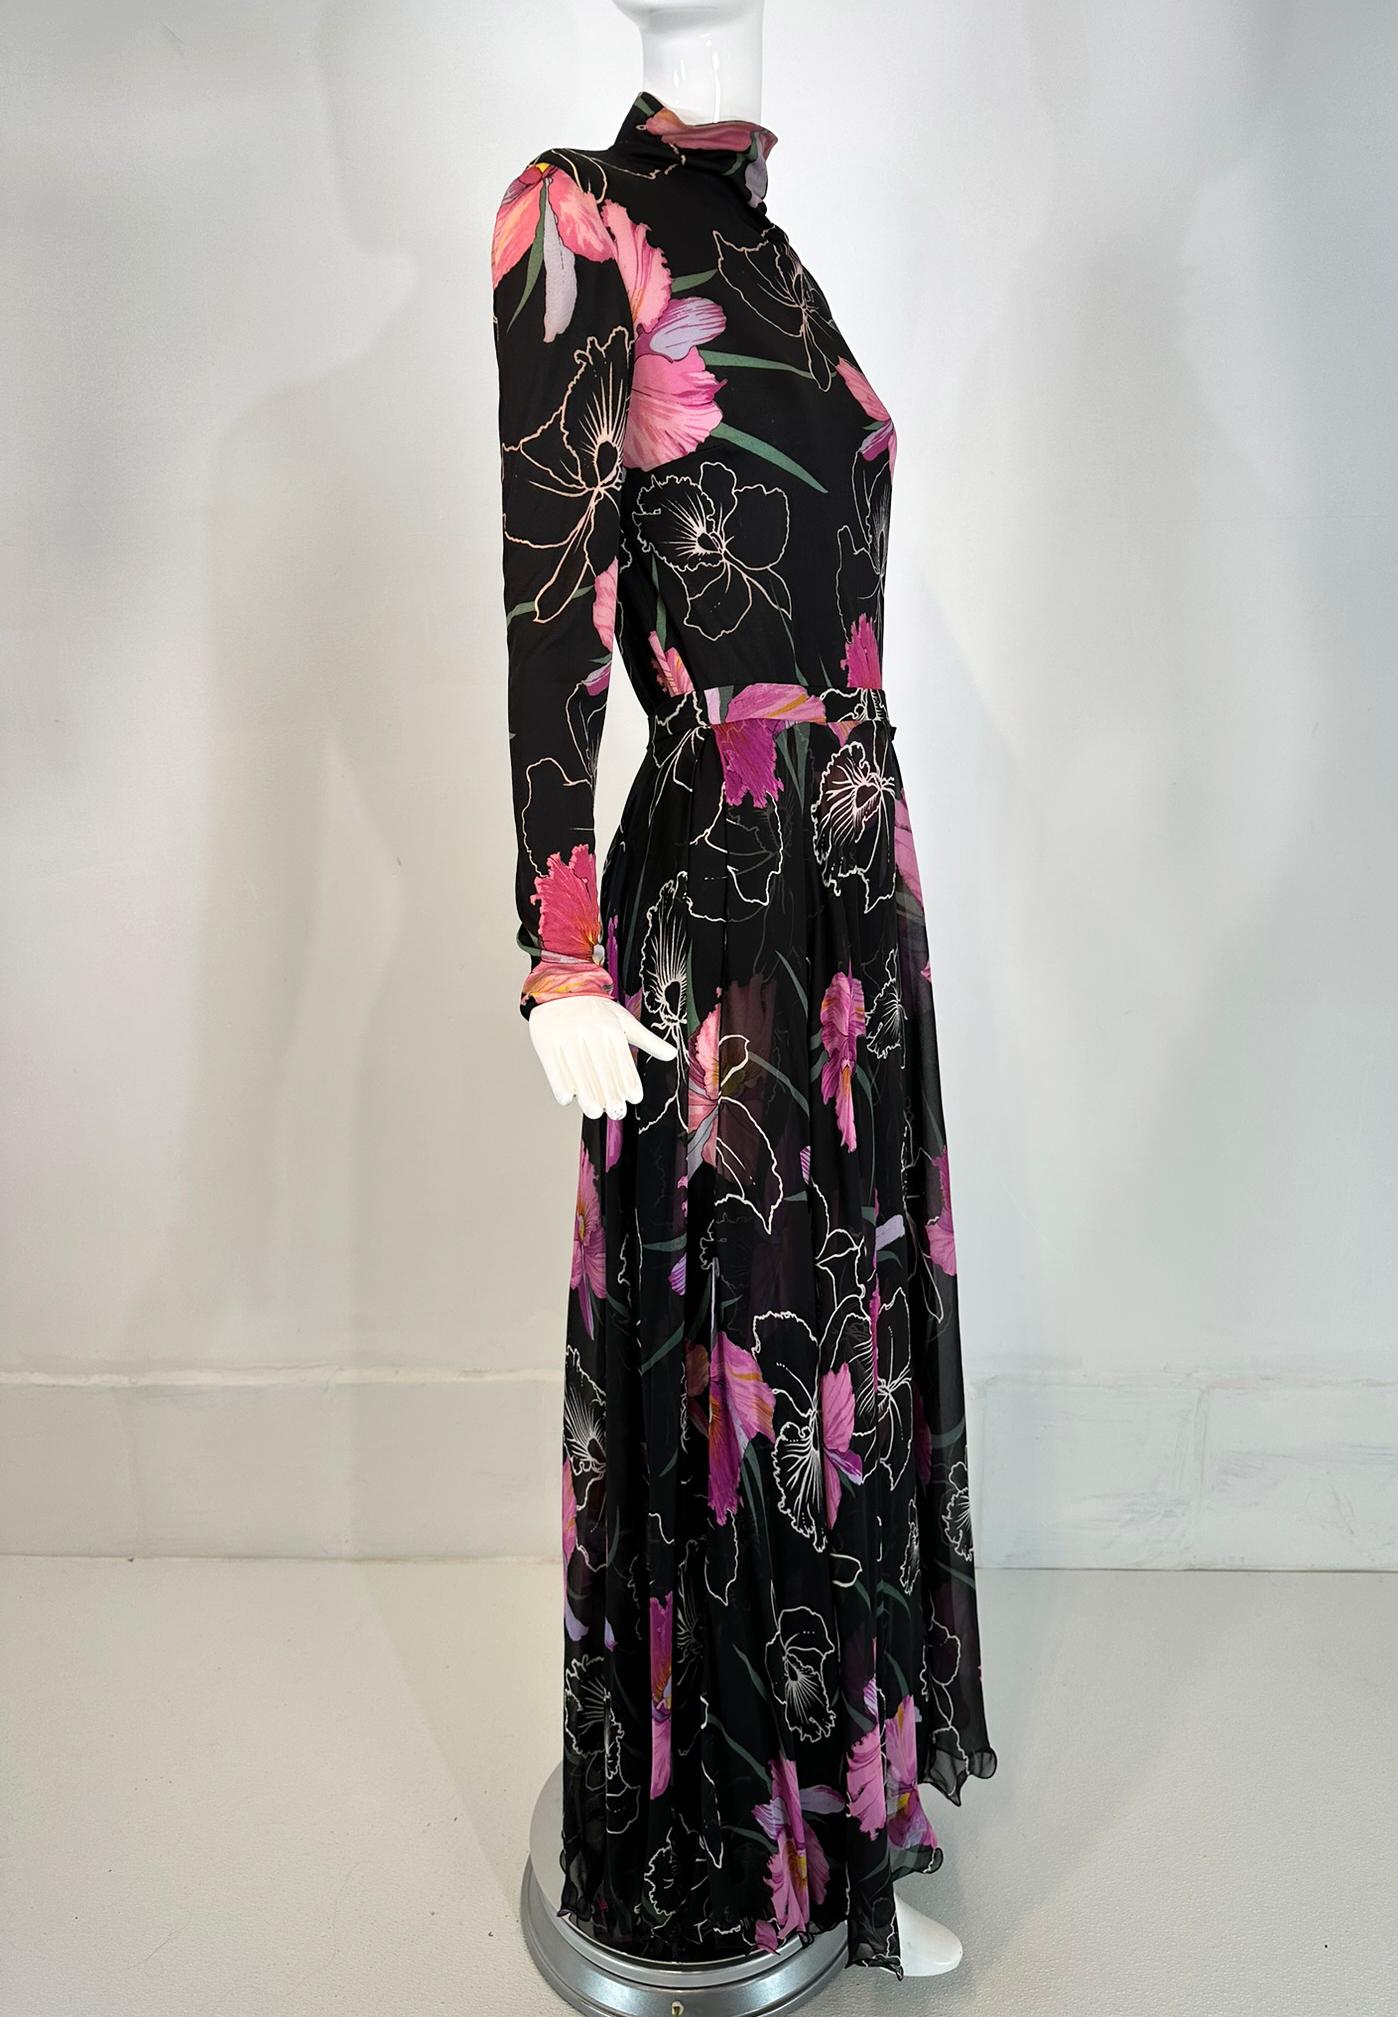 La Mendola 2pc Orchid Print Jersey Maxi Dress & Silk Chiffon Over Skirt 1960s In Good Condition For Sale In West Palm Beach, FL